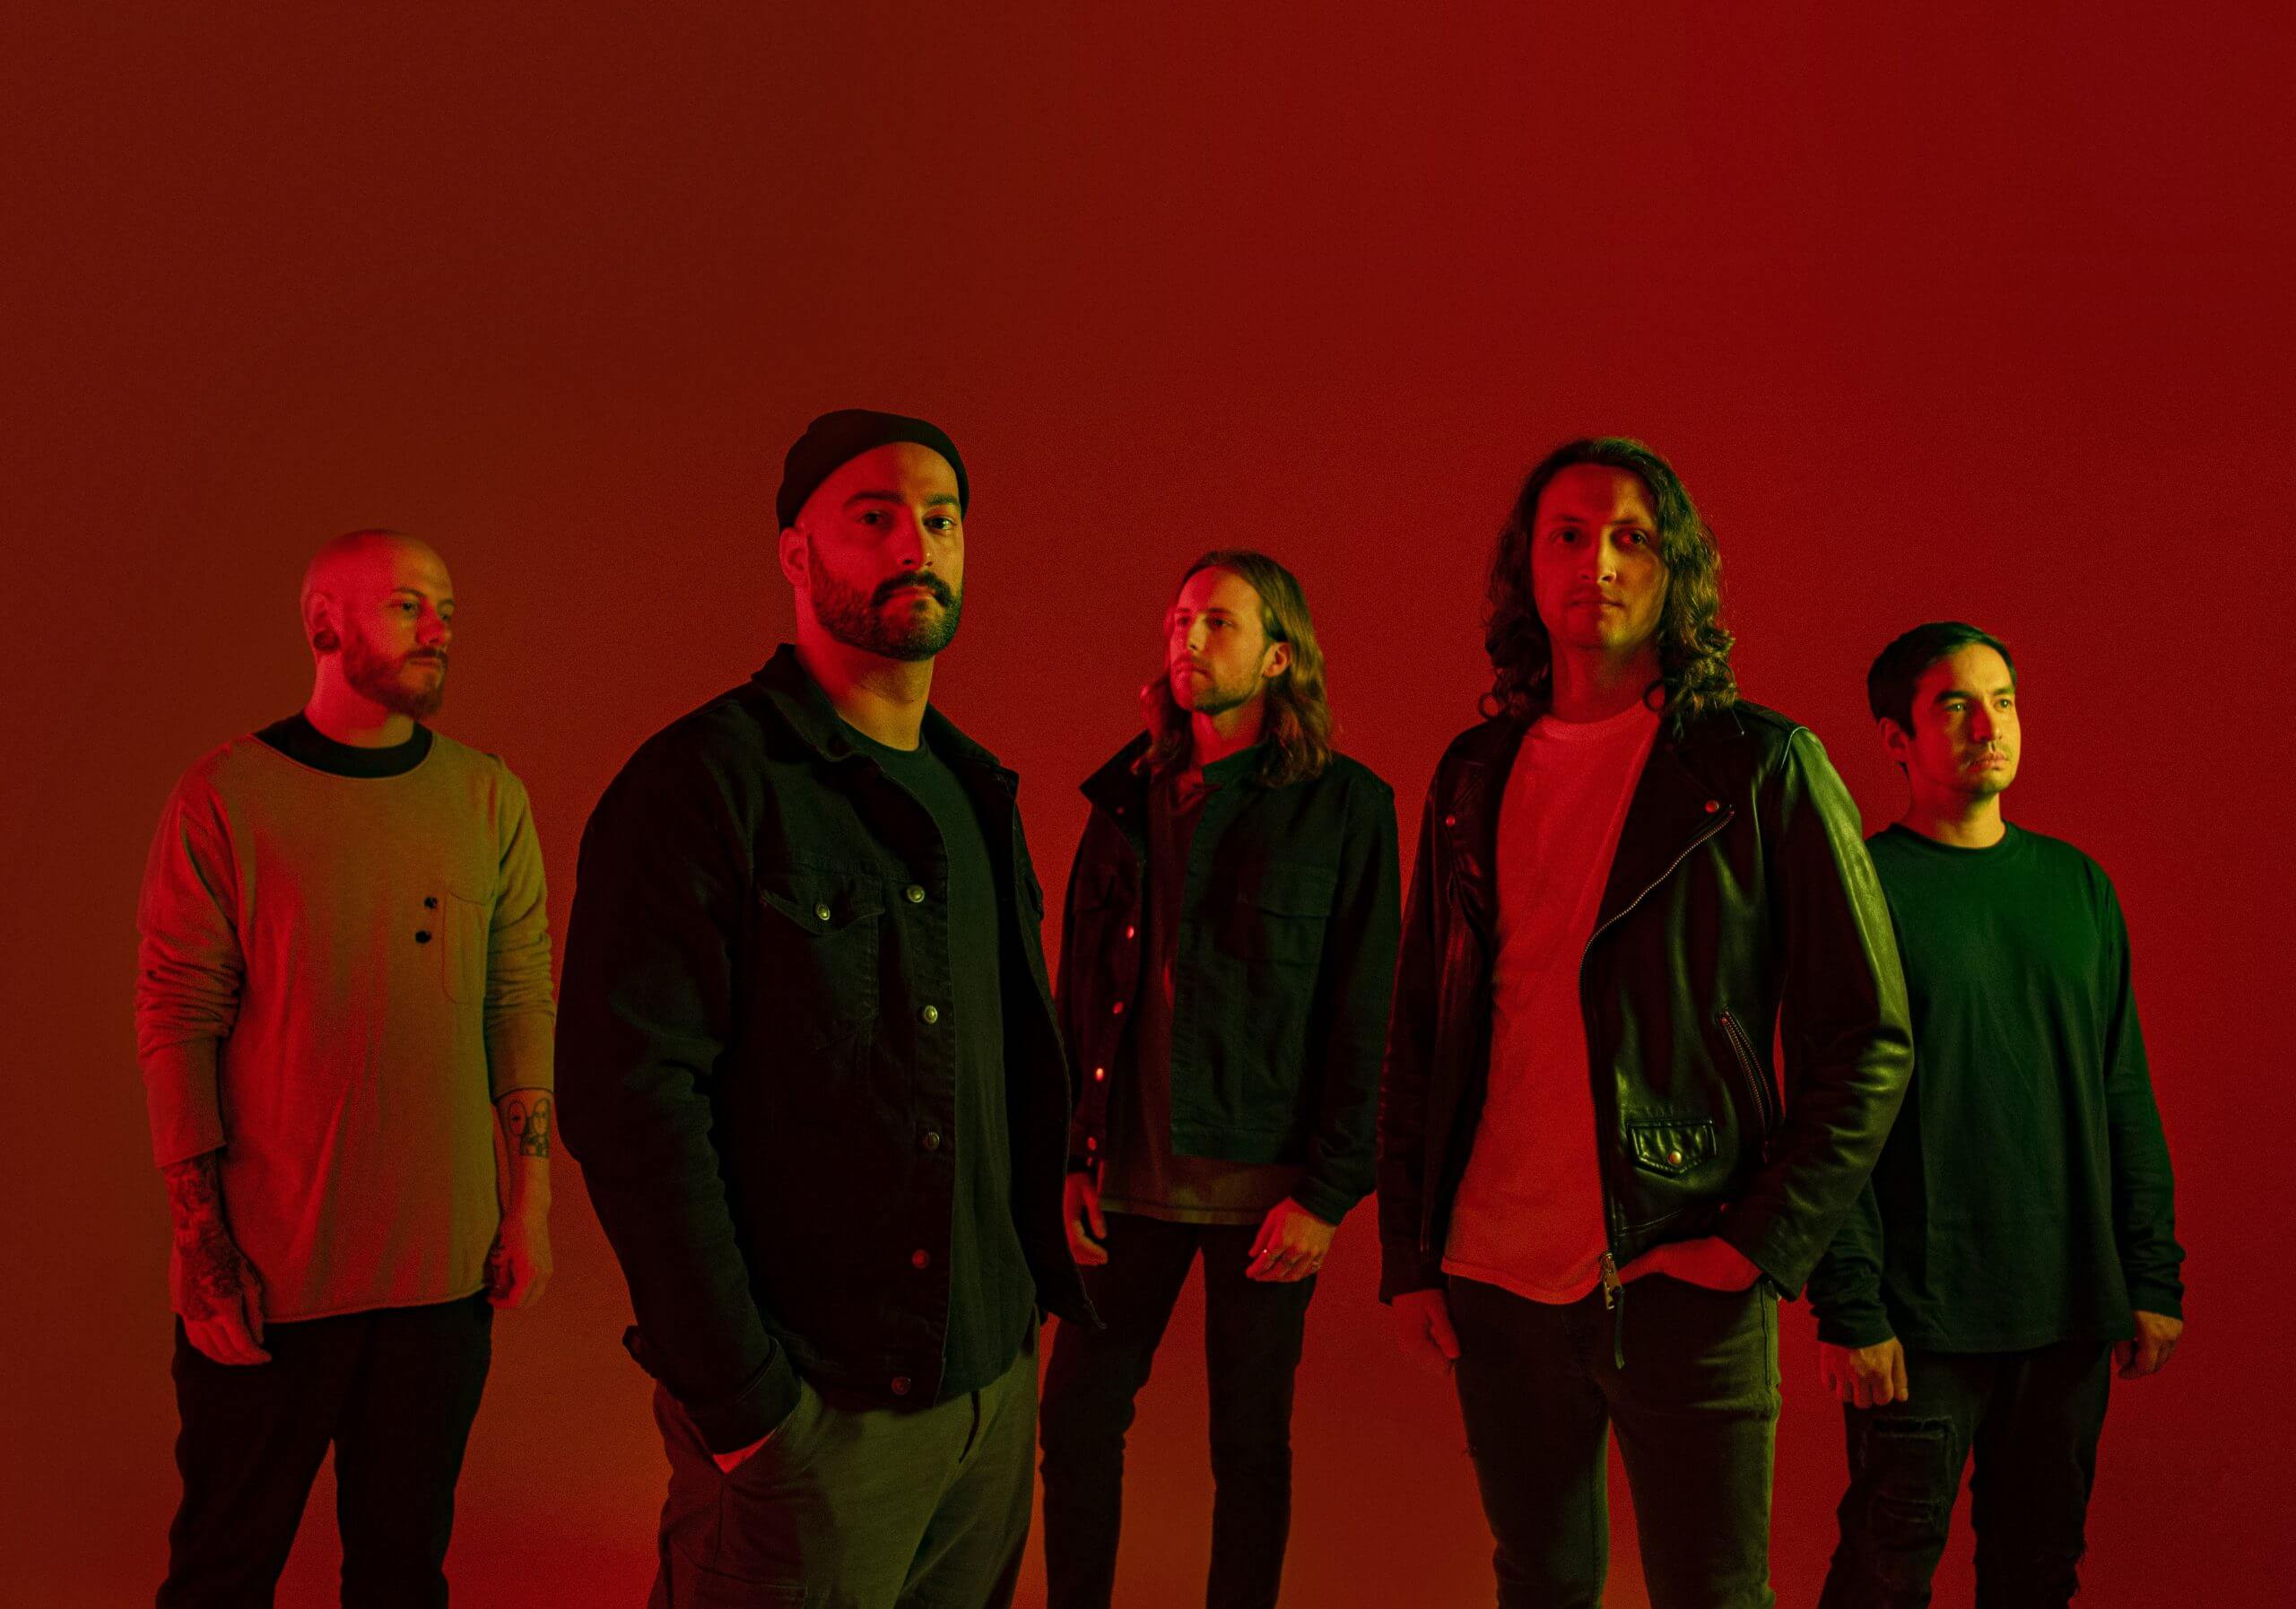 ERRA RELEASE VISUALIZER FOR NEW SINGLE “HOUSE OF GLASS”